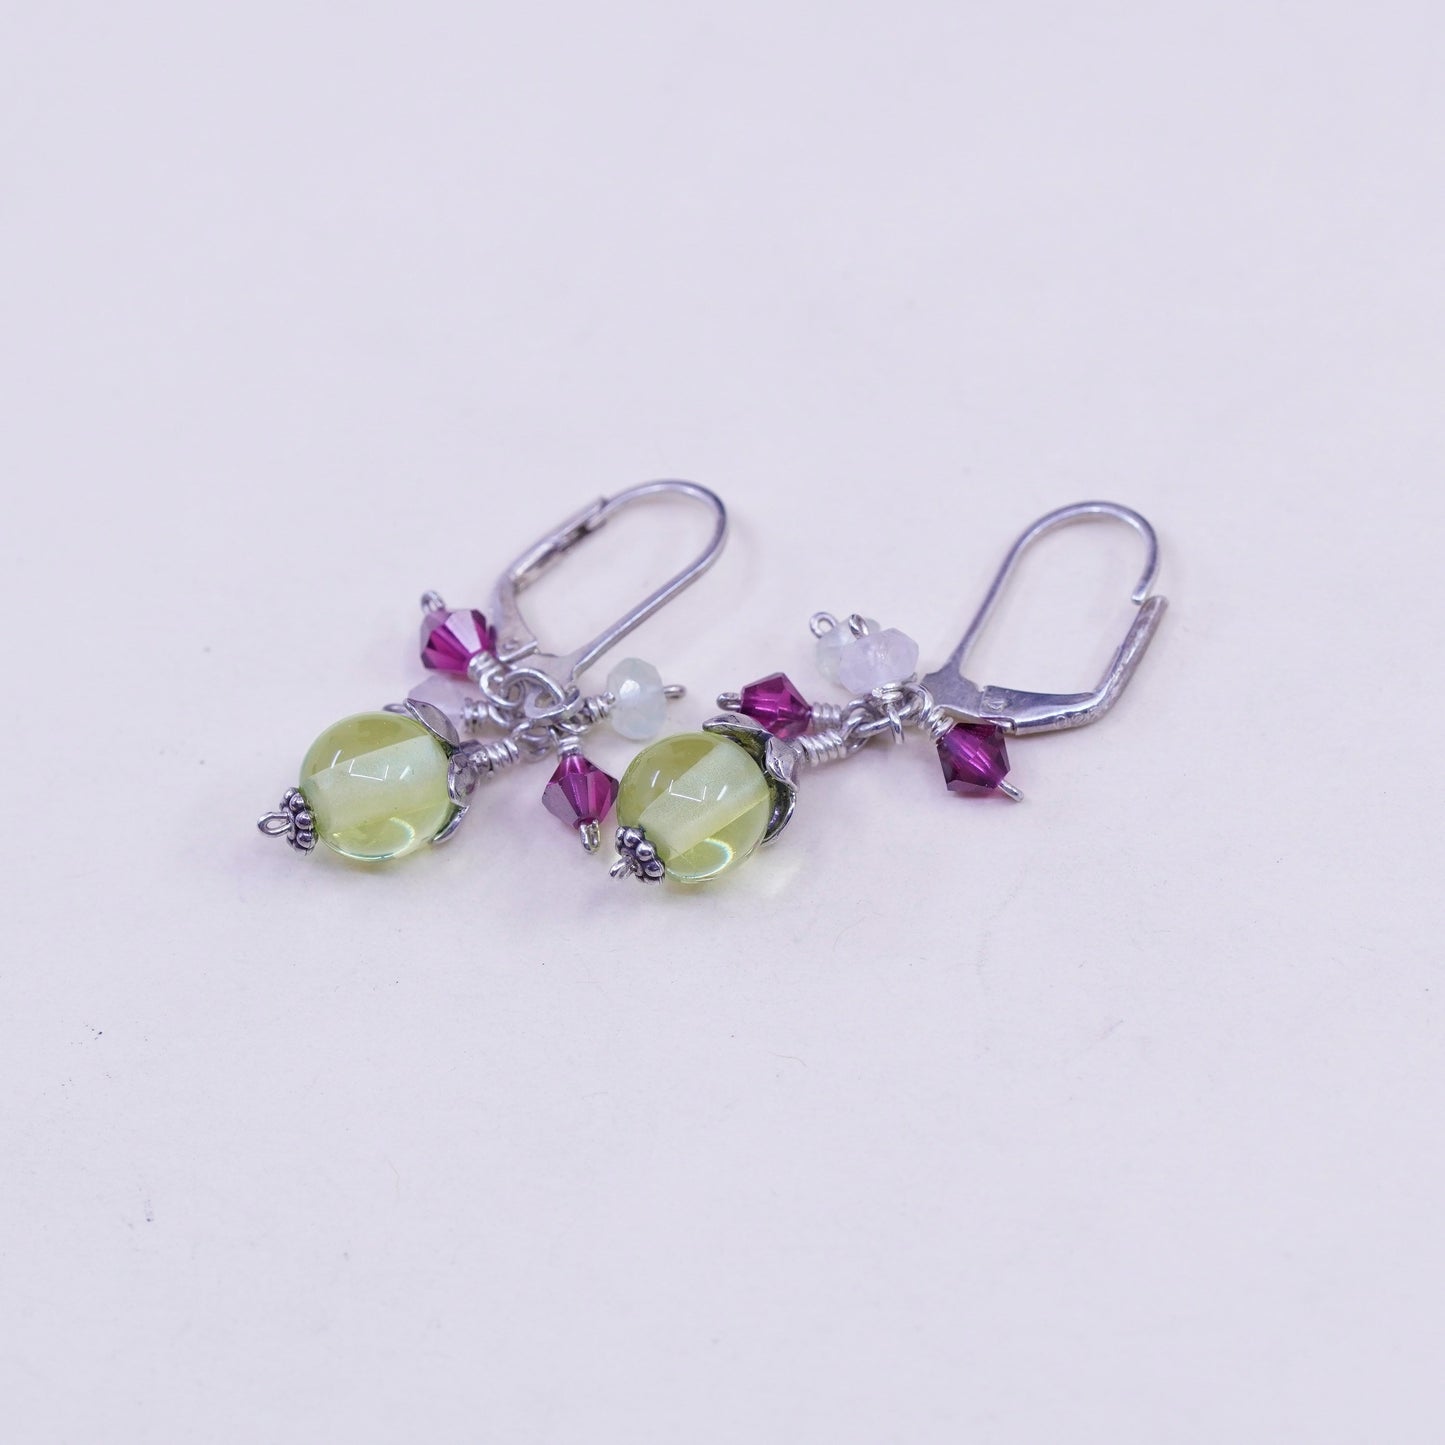 Vintage Sterling 925 silver handmade earrings with cluster green glass beads